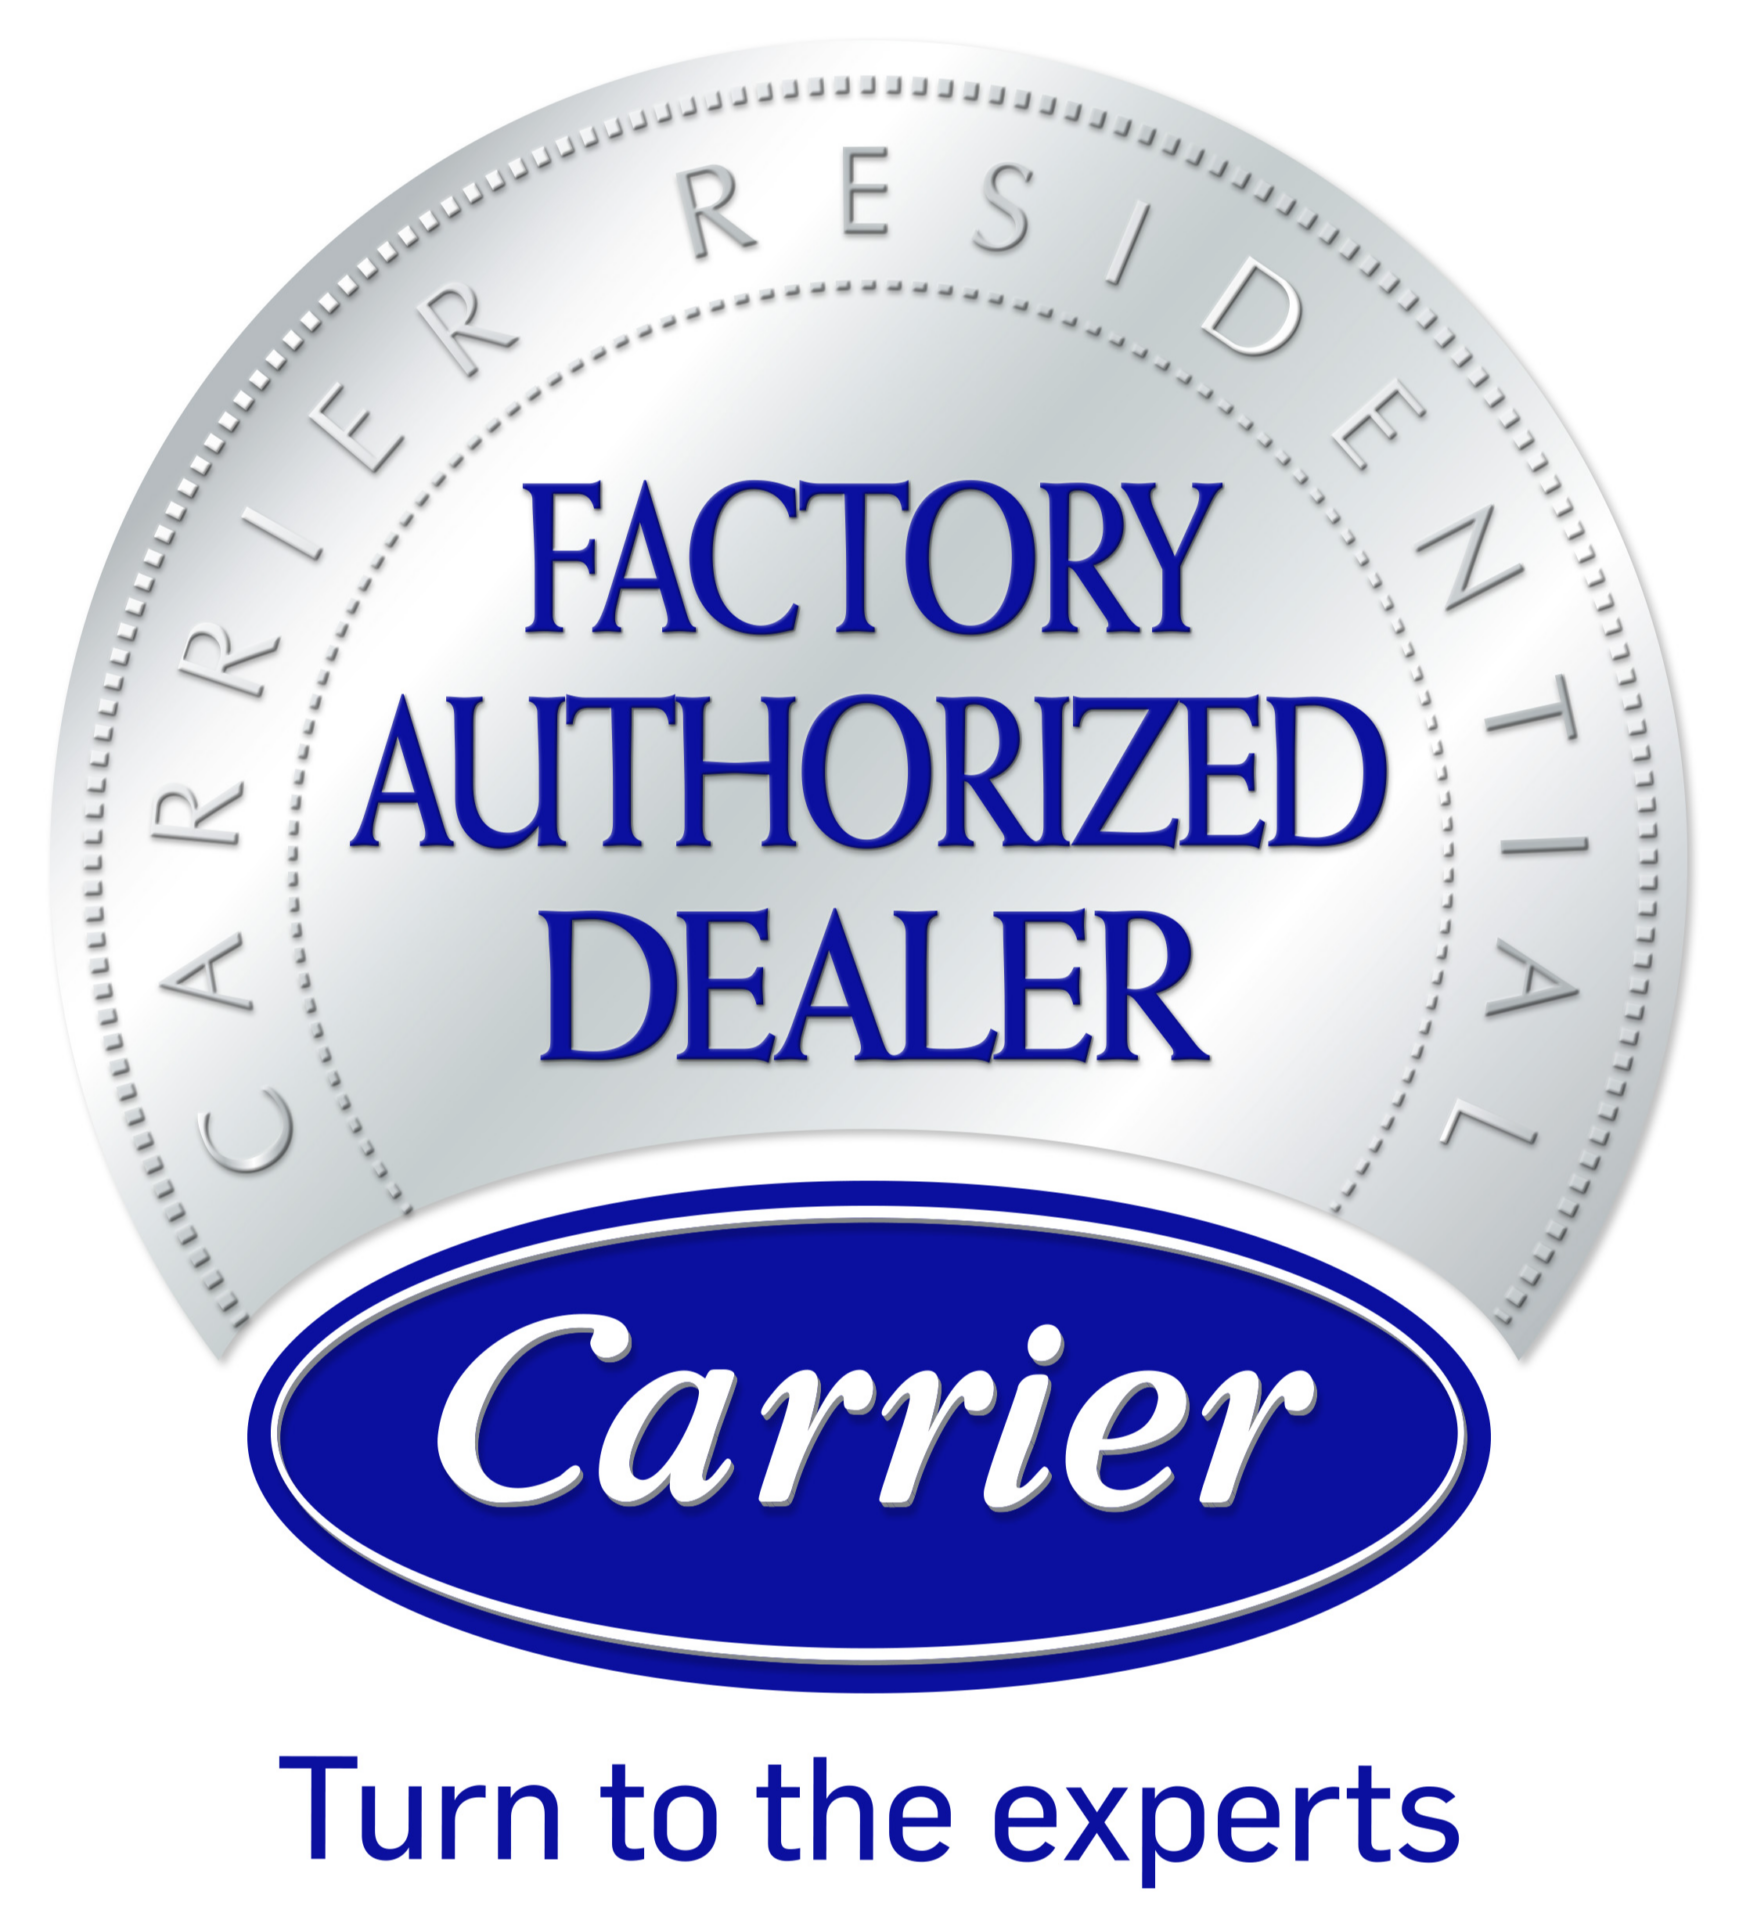 We Are A Carrier Factory Authorized Dealer